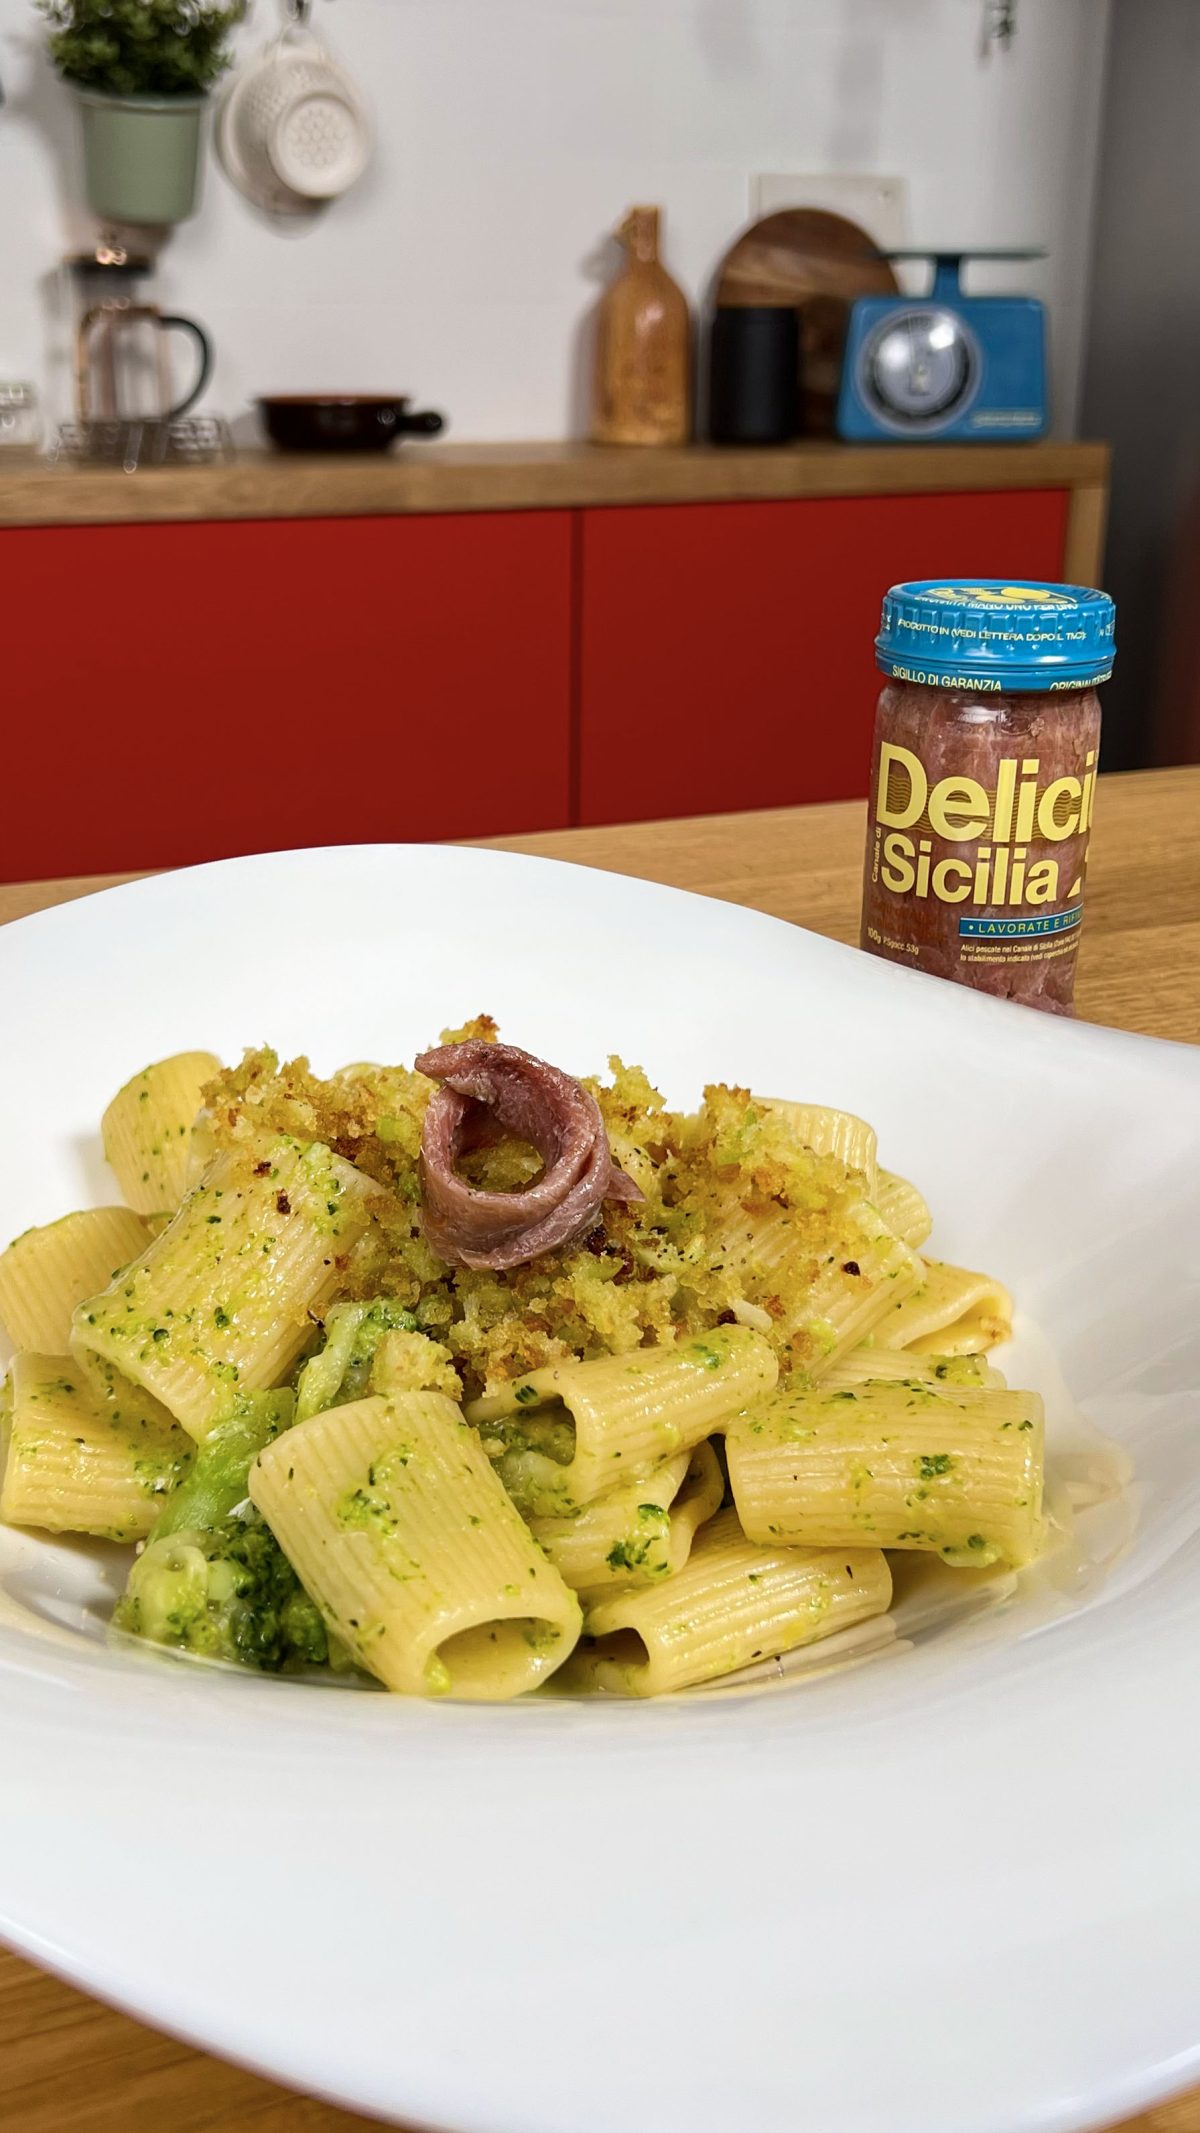 MEZZE MANICHE PASTA WITH BROCCOLI, ANCHOVY FILLETS FROM SICILY AND BROCCOLI CRUMBLE